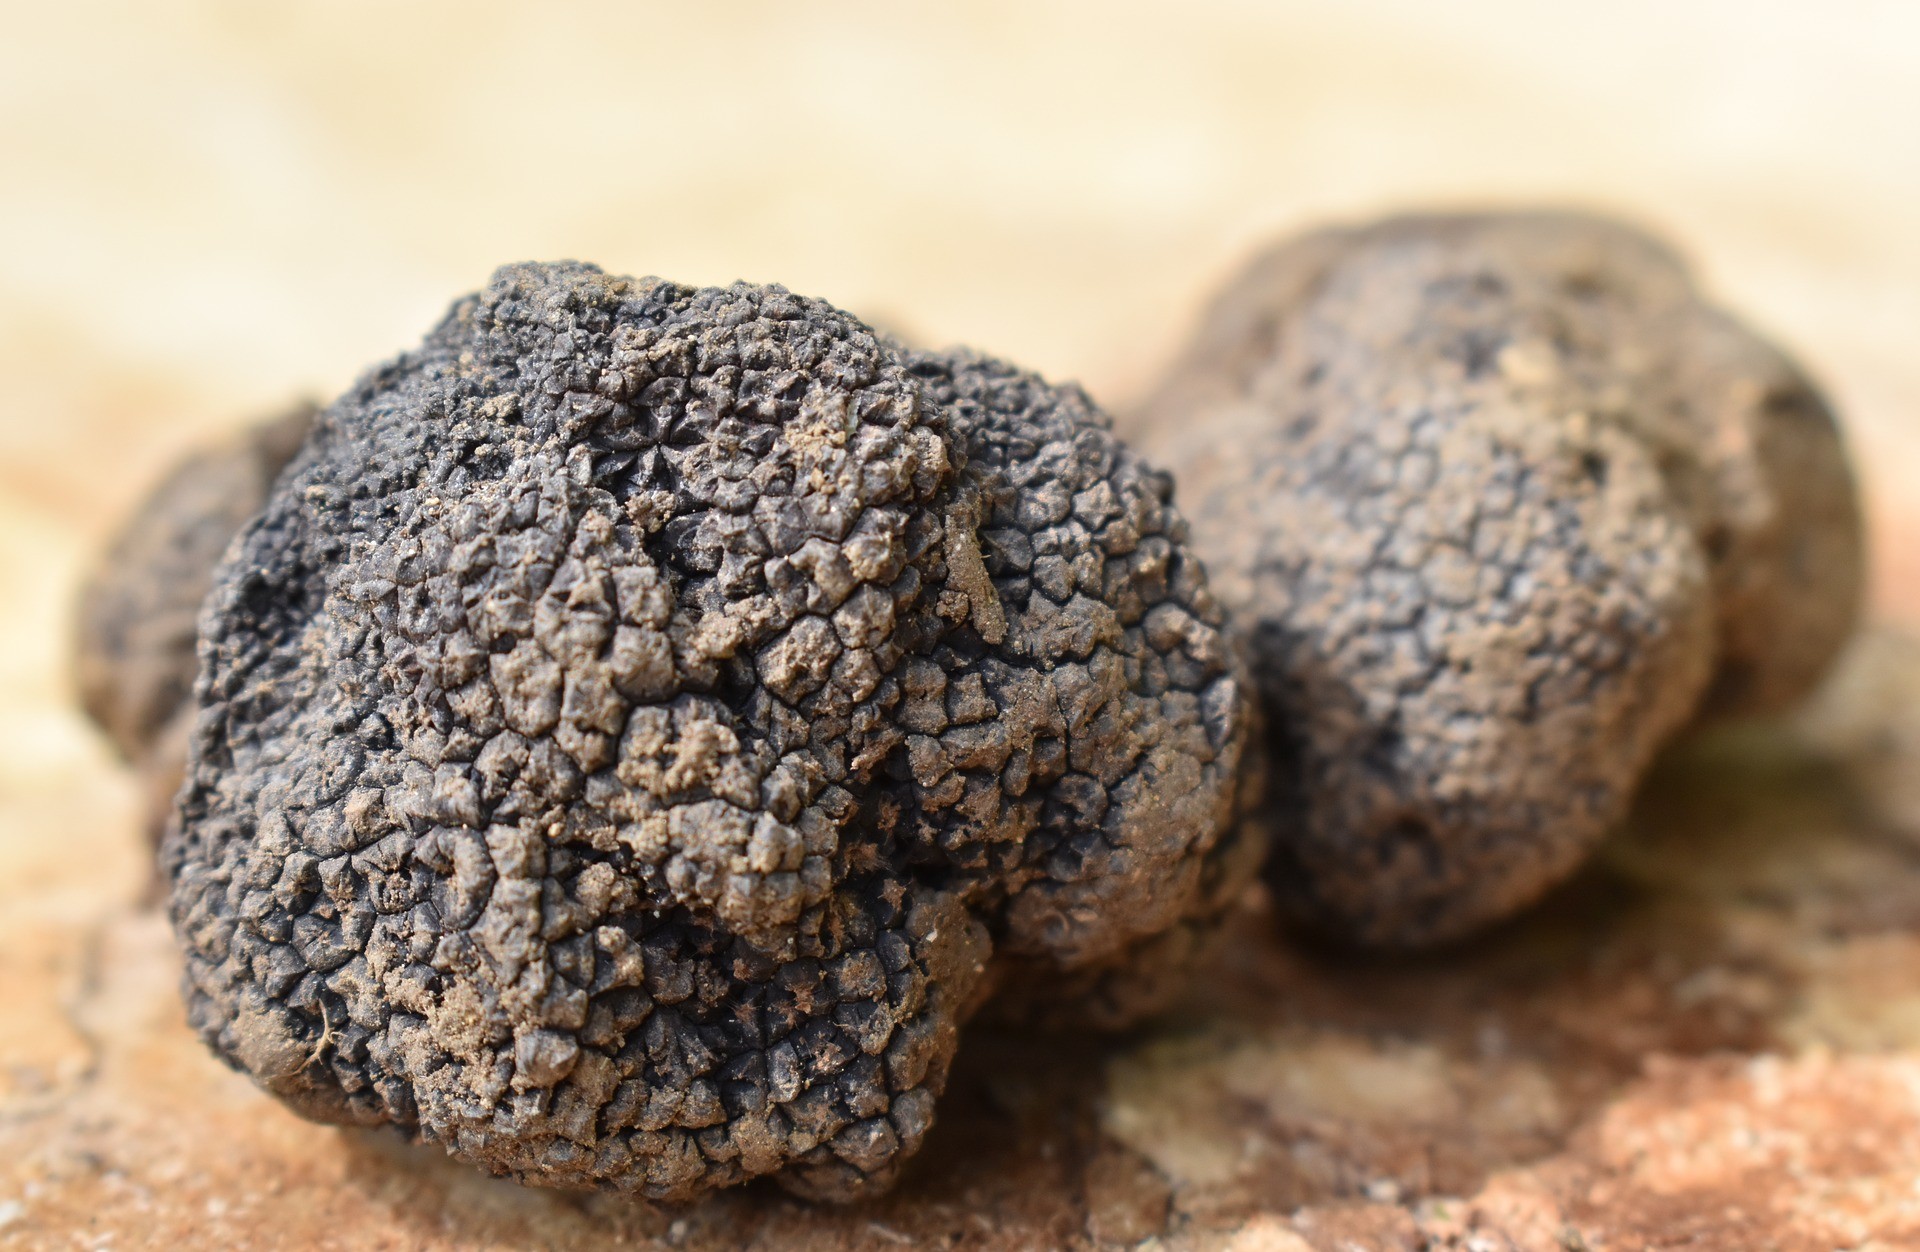 Looking for truffles in the hills of the Marche region